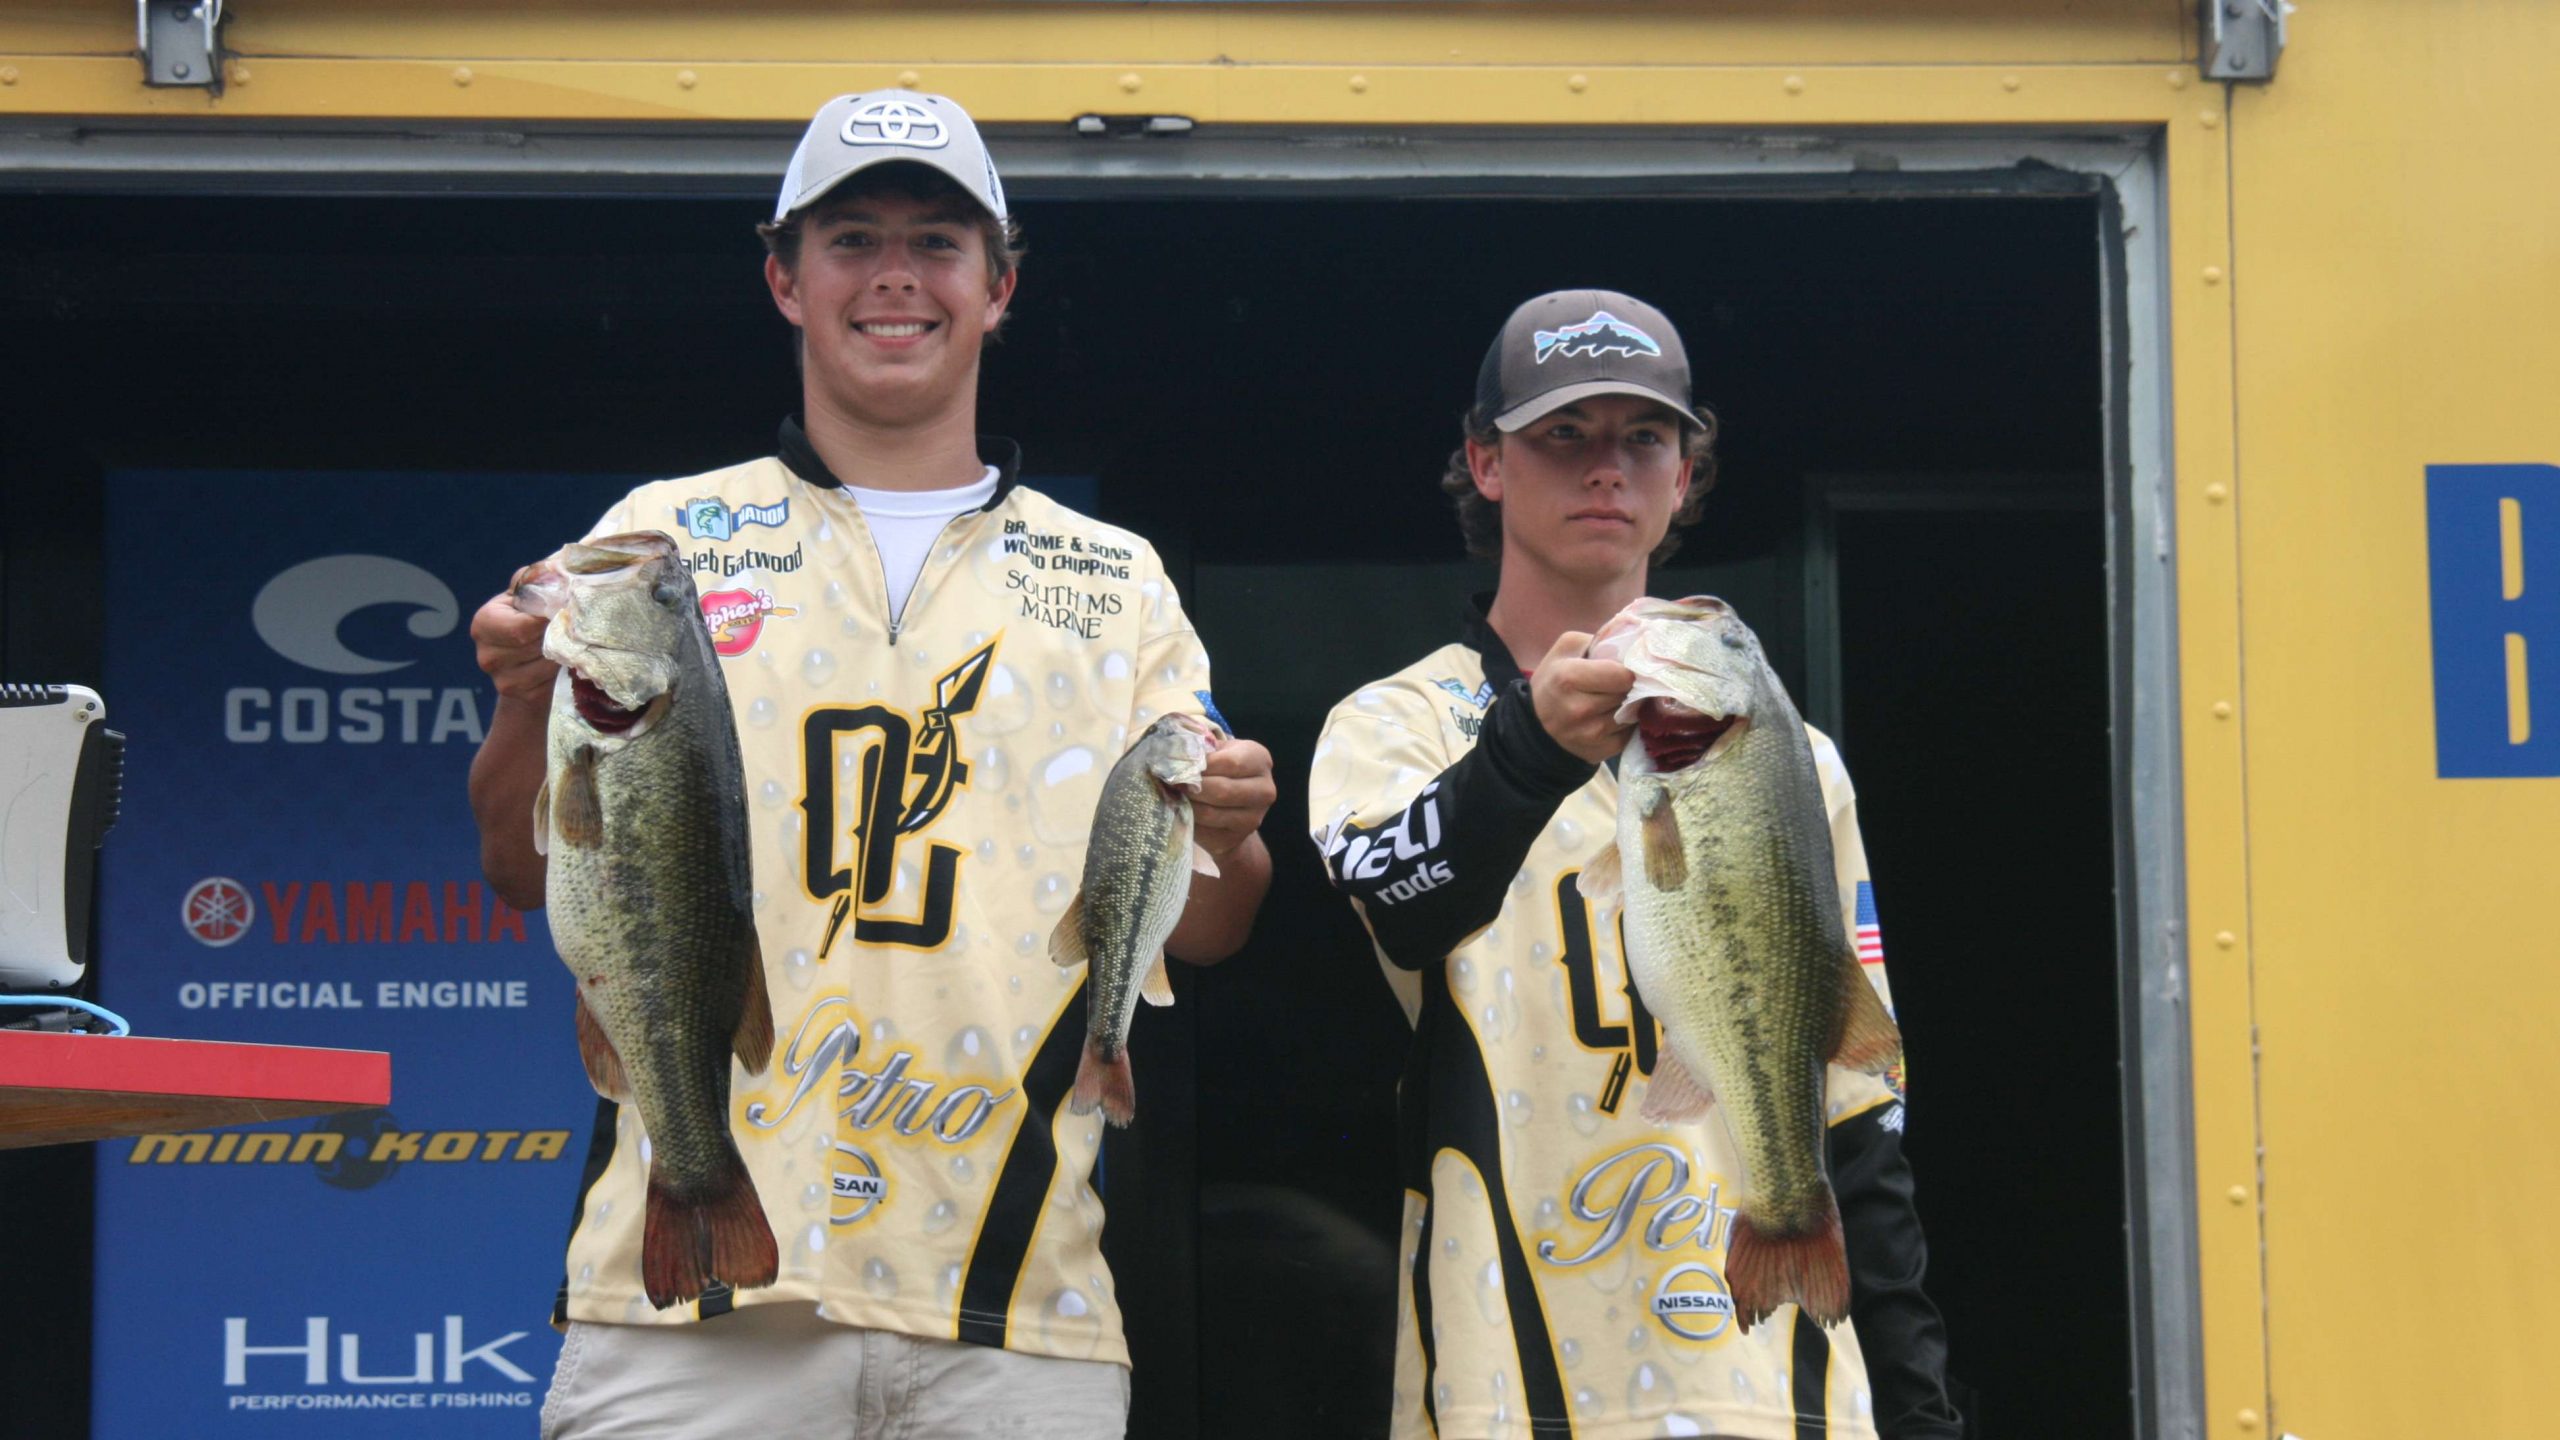 But they were replaced in a flash by the Oak Grove (Miss.) tandem of Caleb Gatwood and Cayden Soberoski. Though they only weighed three bass, two of them were monsters, and that was enough to put them in the hot seat for the remainder of the day.